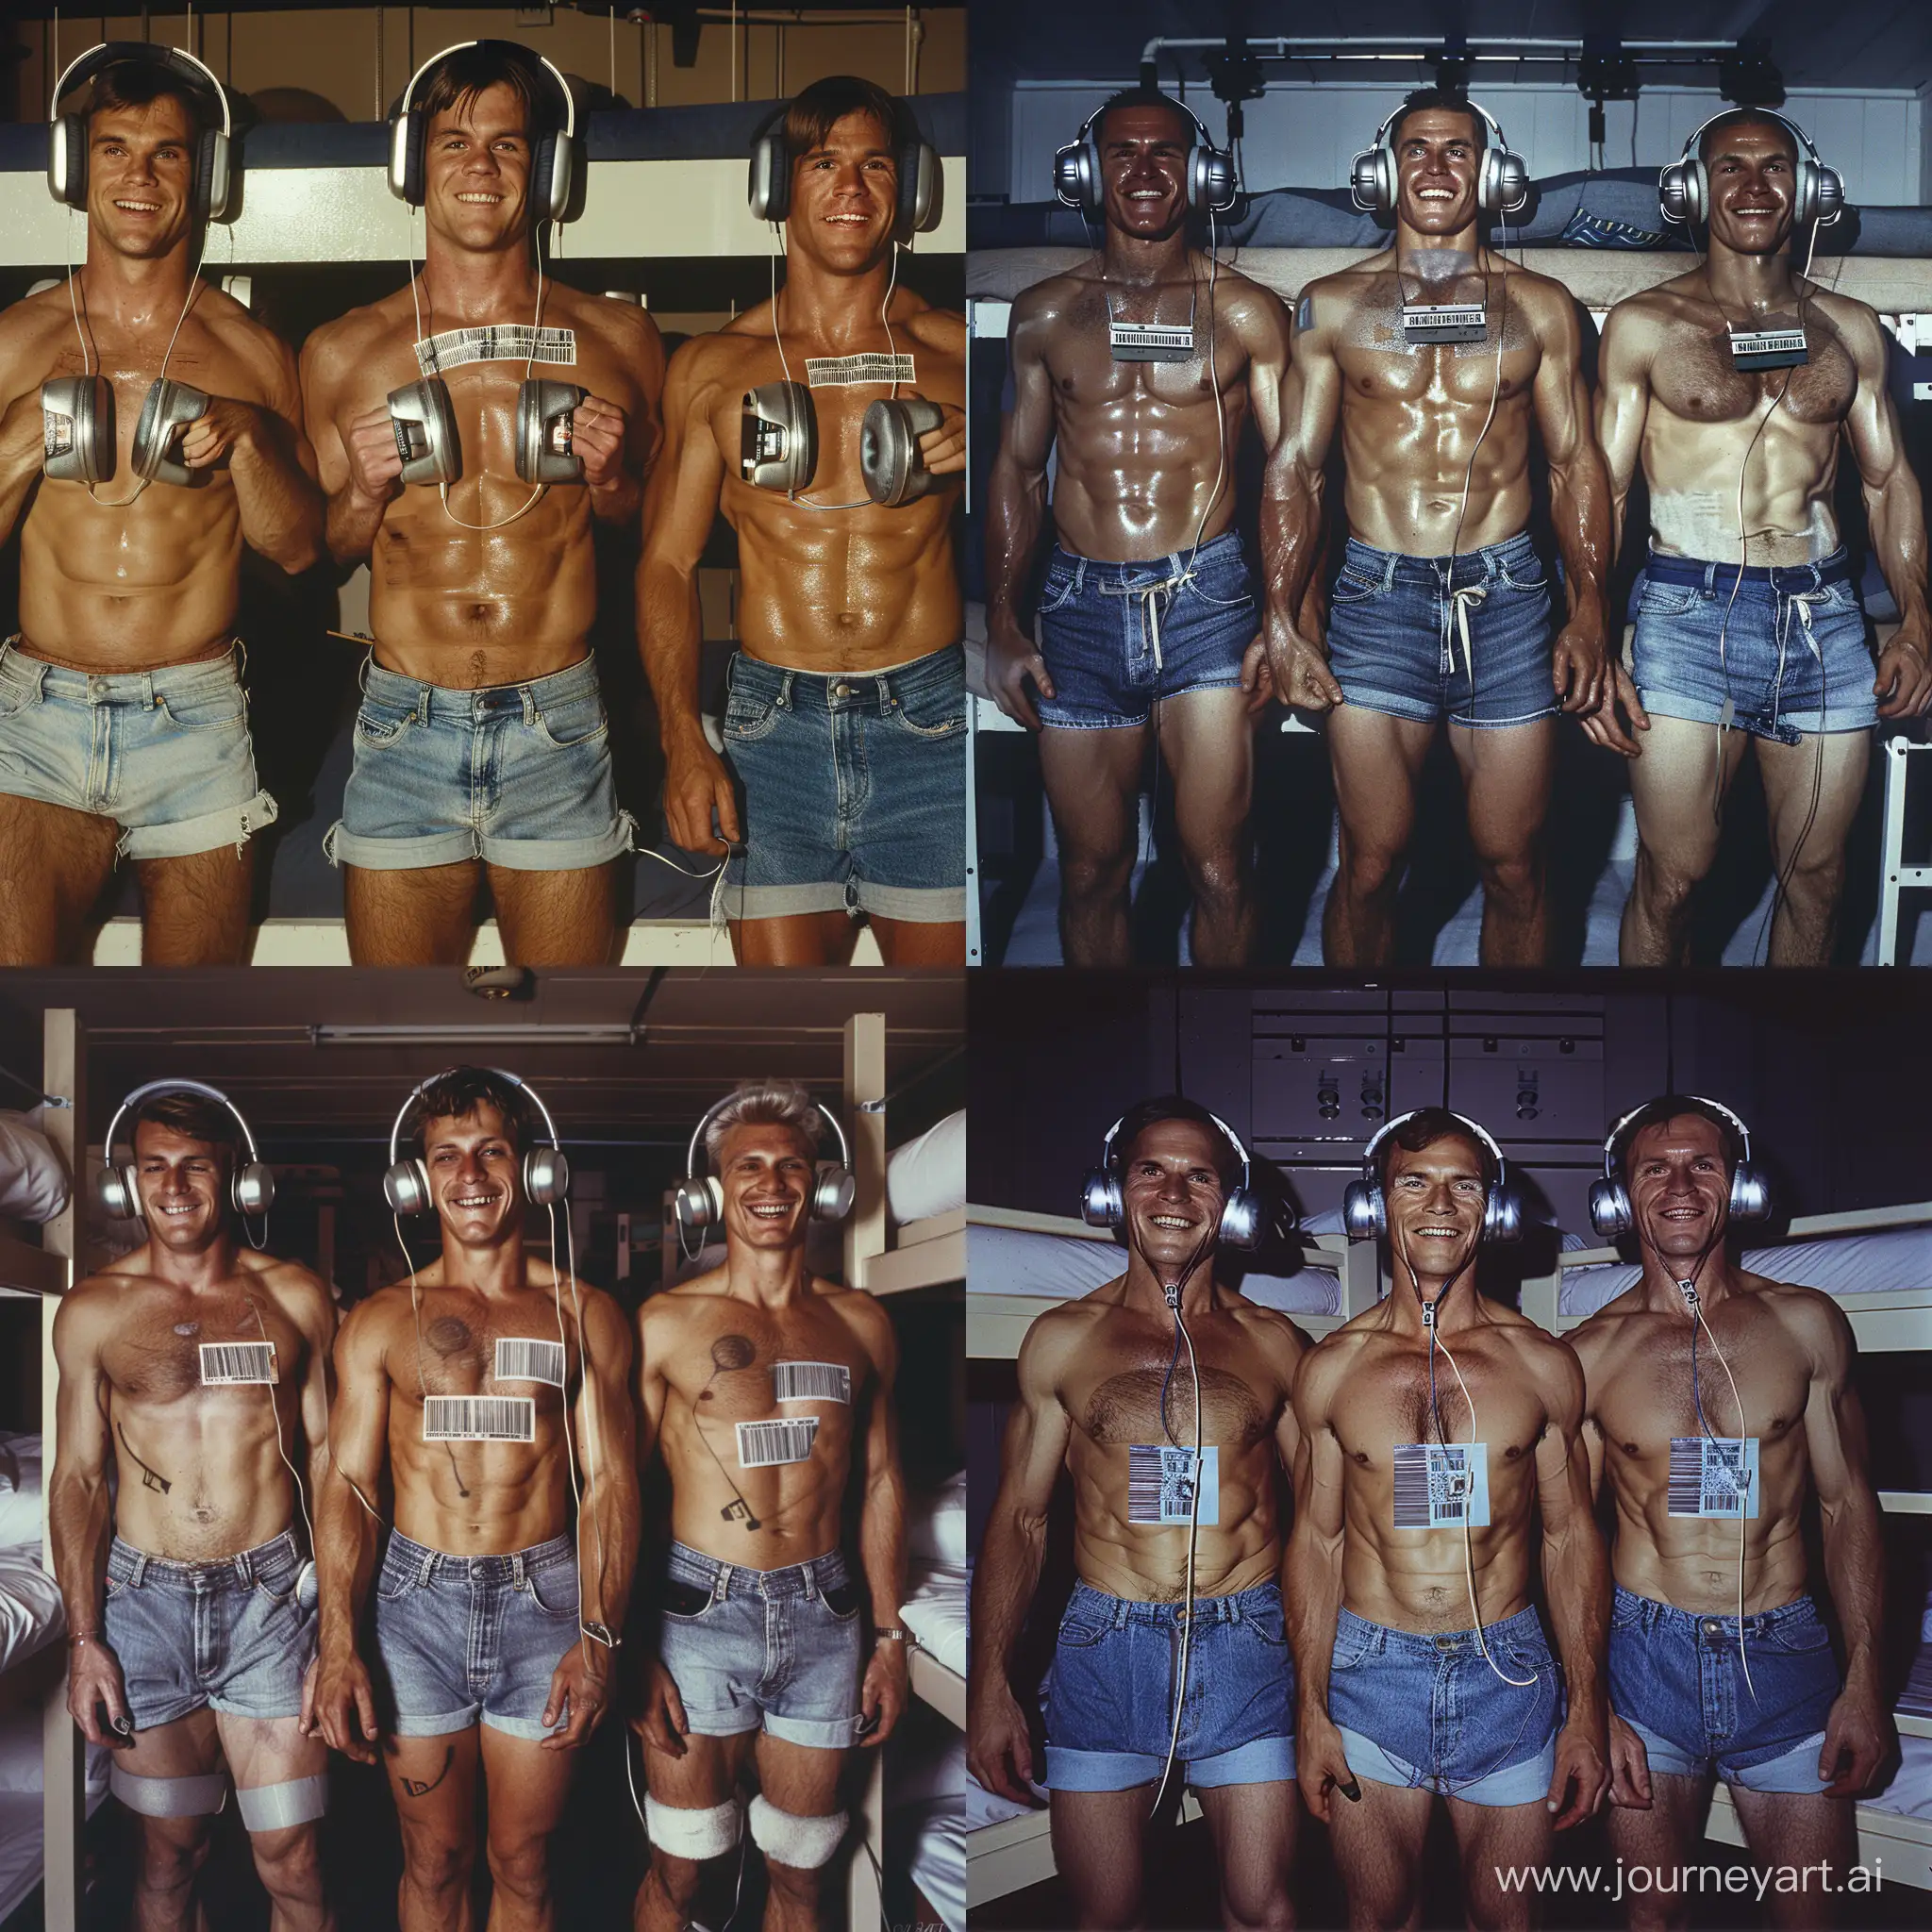 Handsome muscular middle-aged men each wear silver headphones and fitted denim cutoff shorts, dazed smiles, small barcode attached to each man's chest, 1980s youth hostel dormitory bunkbed setting, facing the viewer, mass indoctrination, color image, hyperrealistic, cinematic